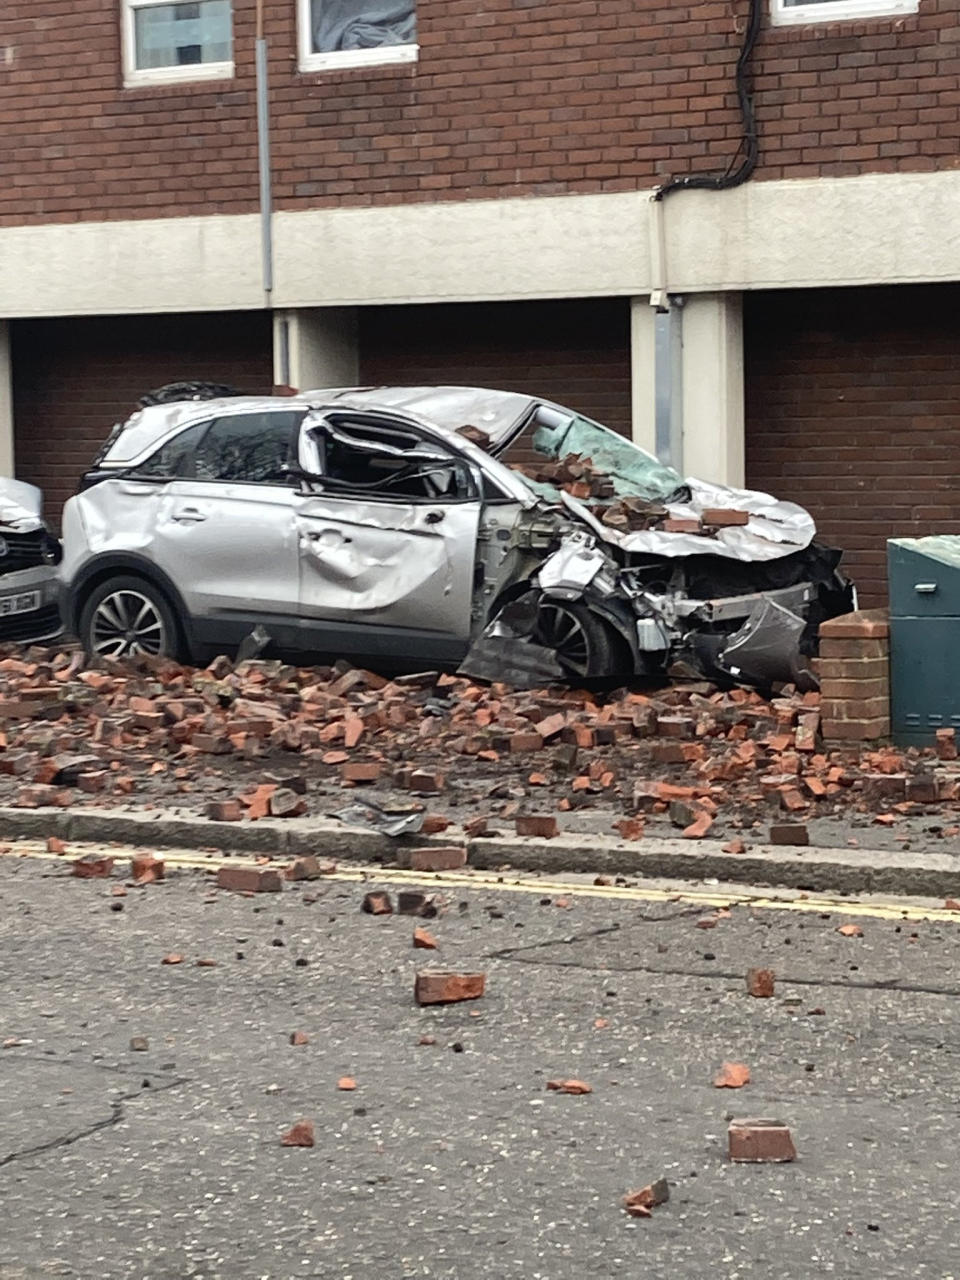 Damage to a car caused by falling bricks from a tower block during Storm Eunice. (PA)